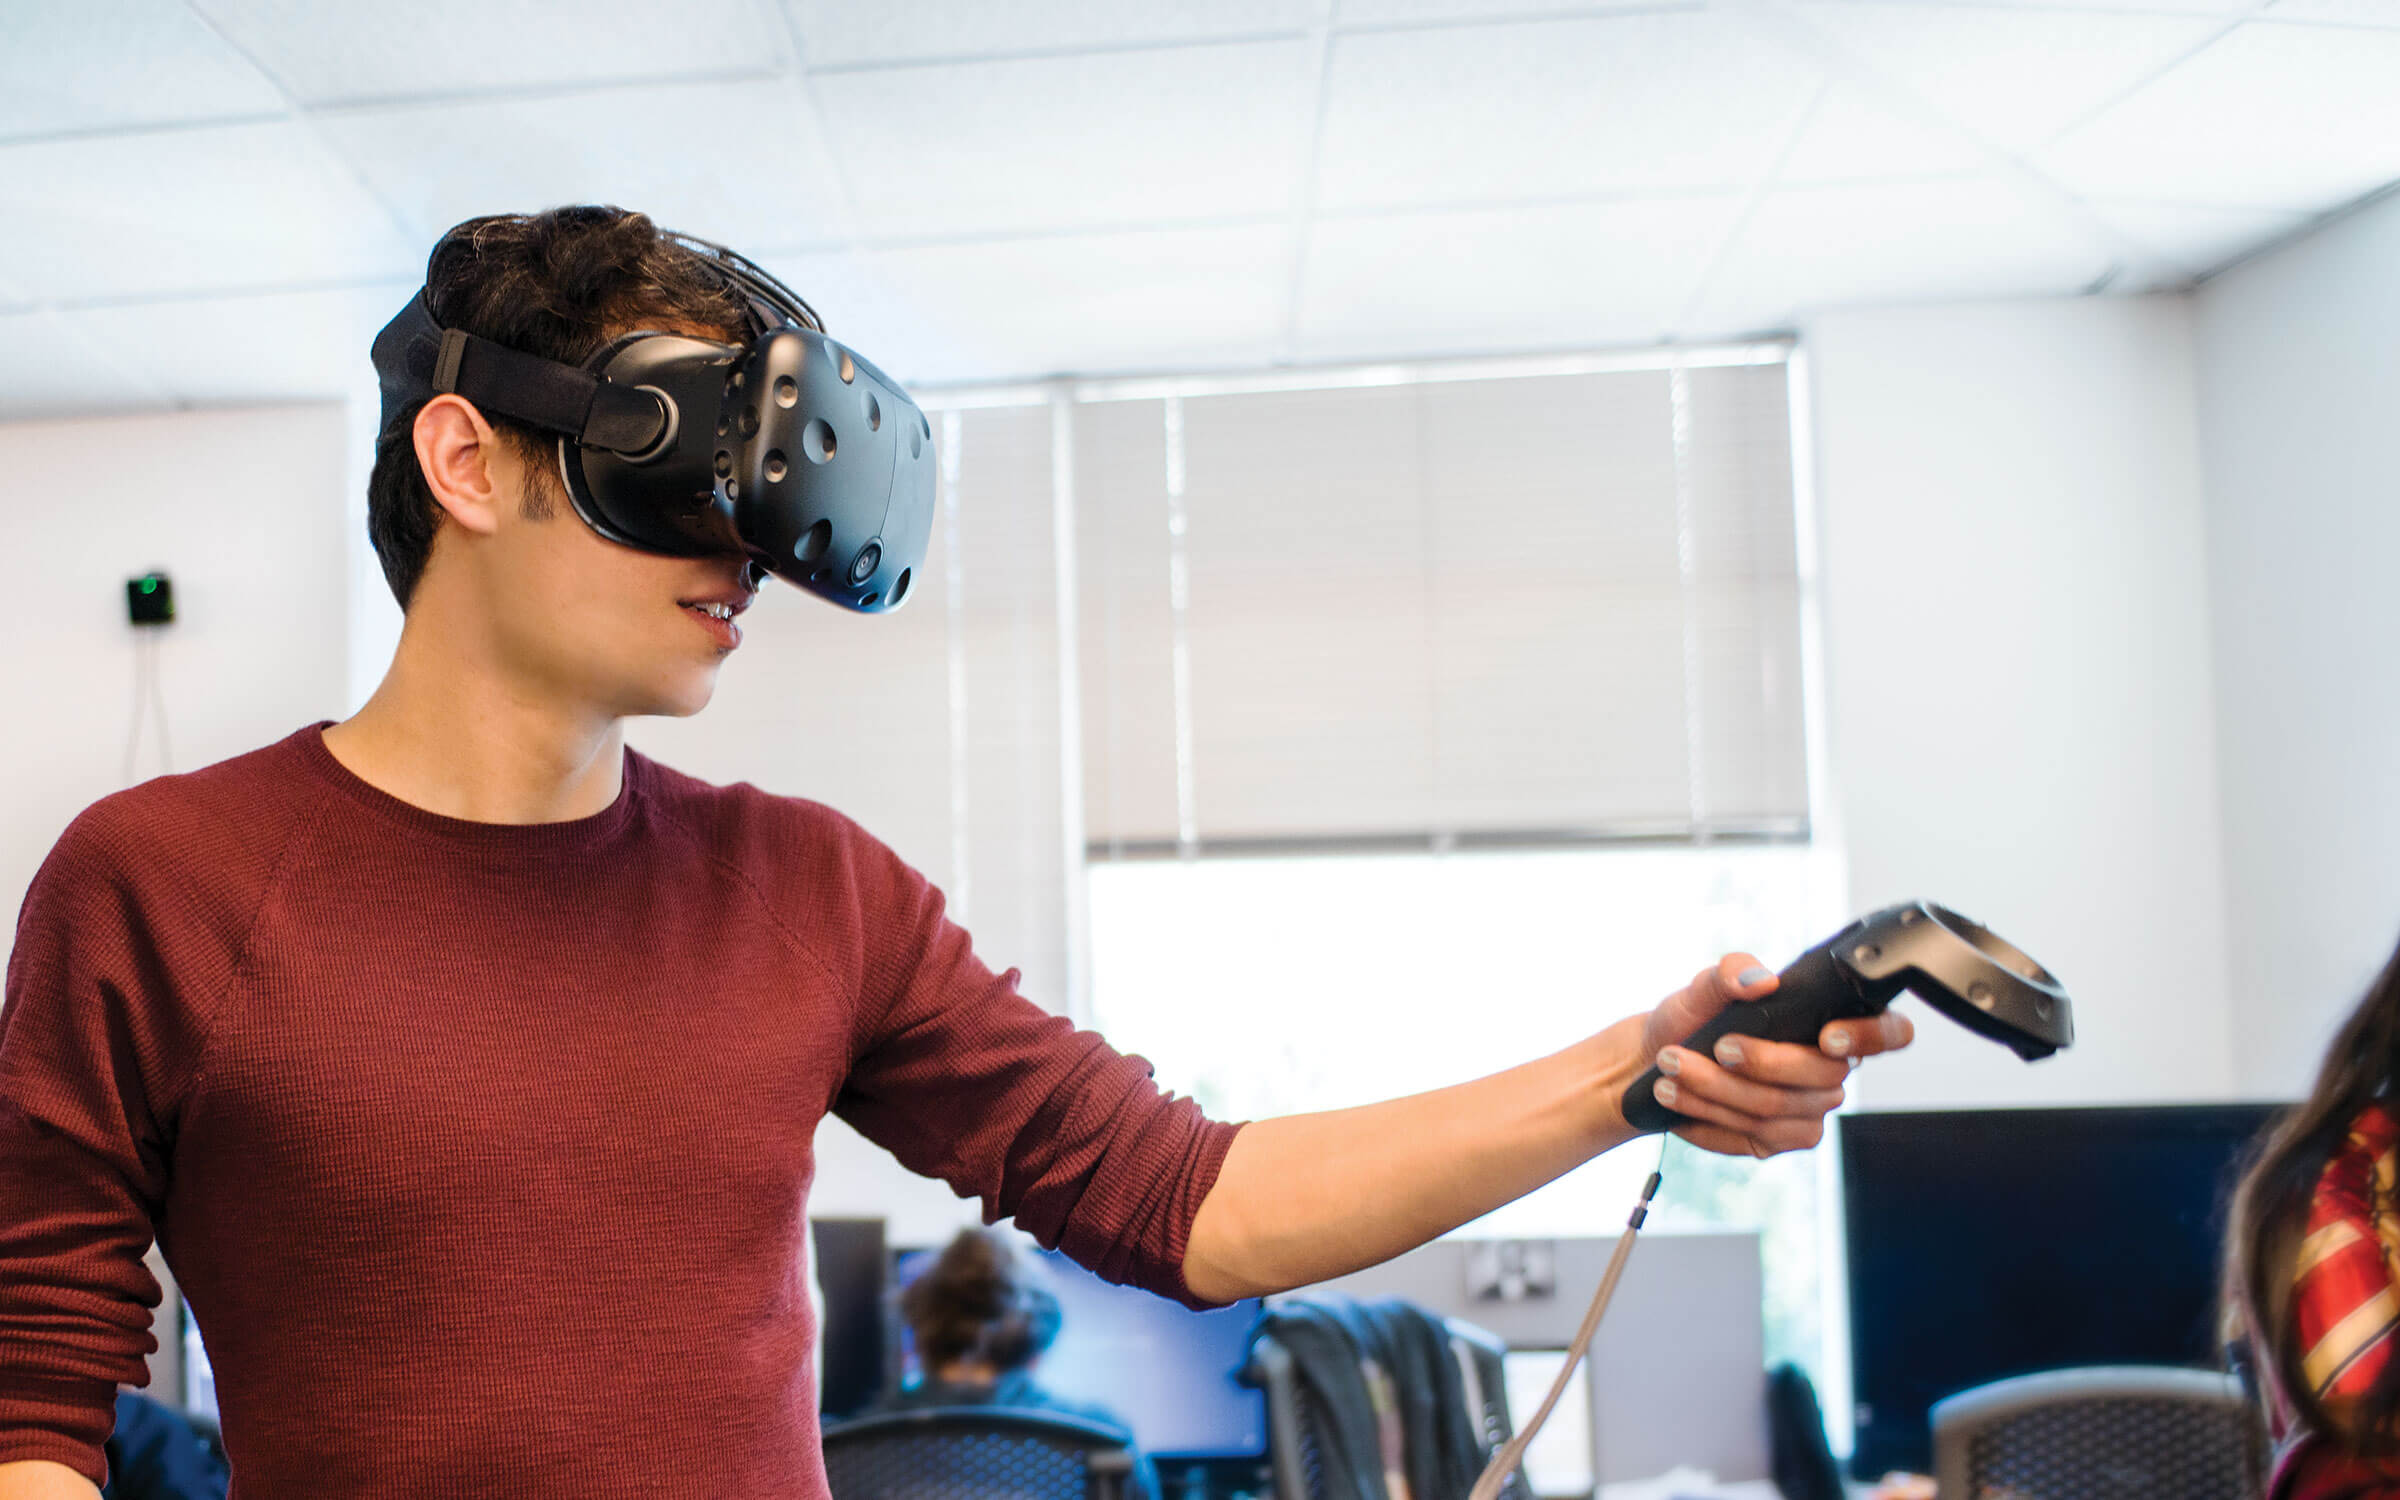 Man wearing virtual reality goggles holds up a game controller in one hand.